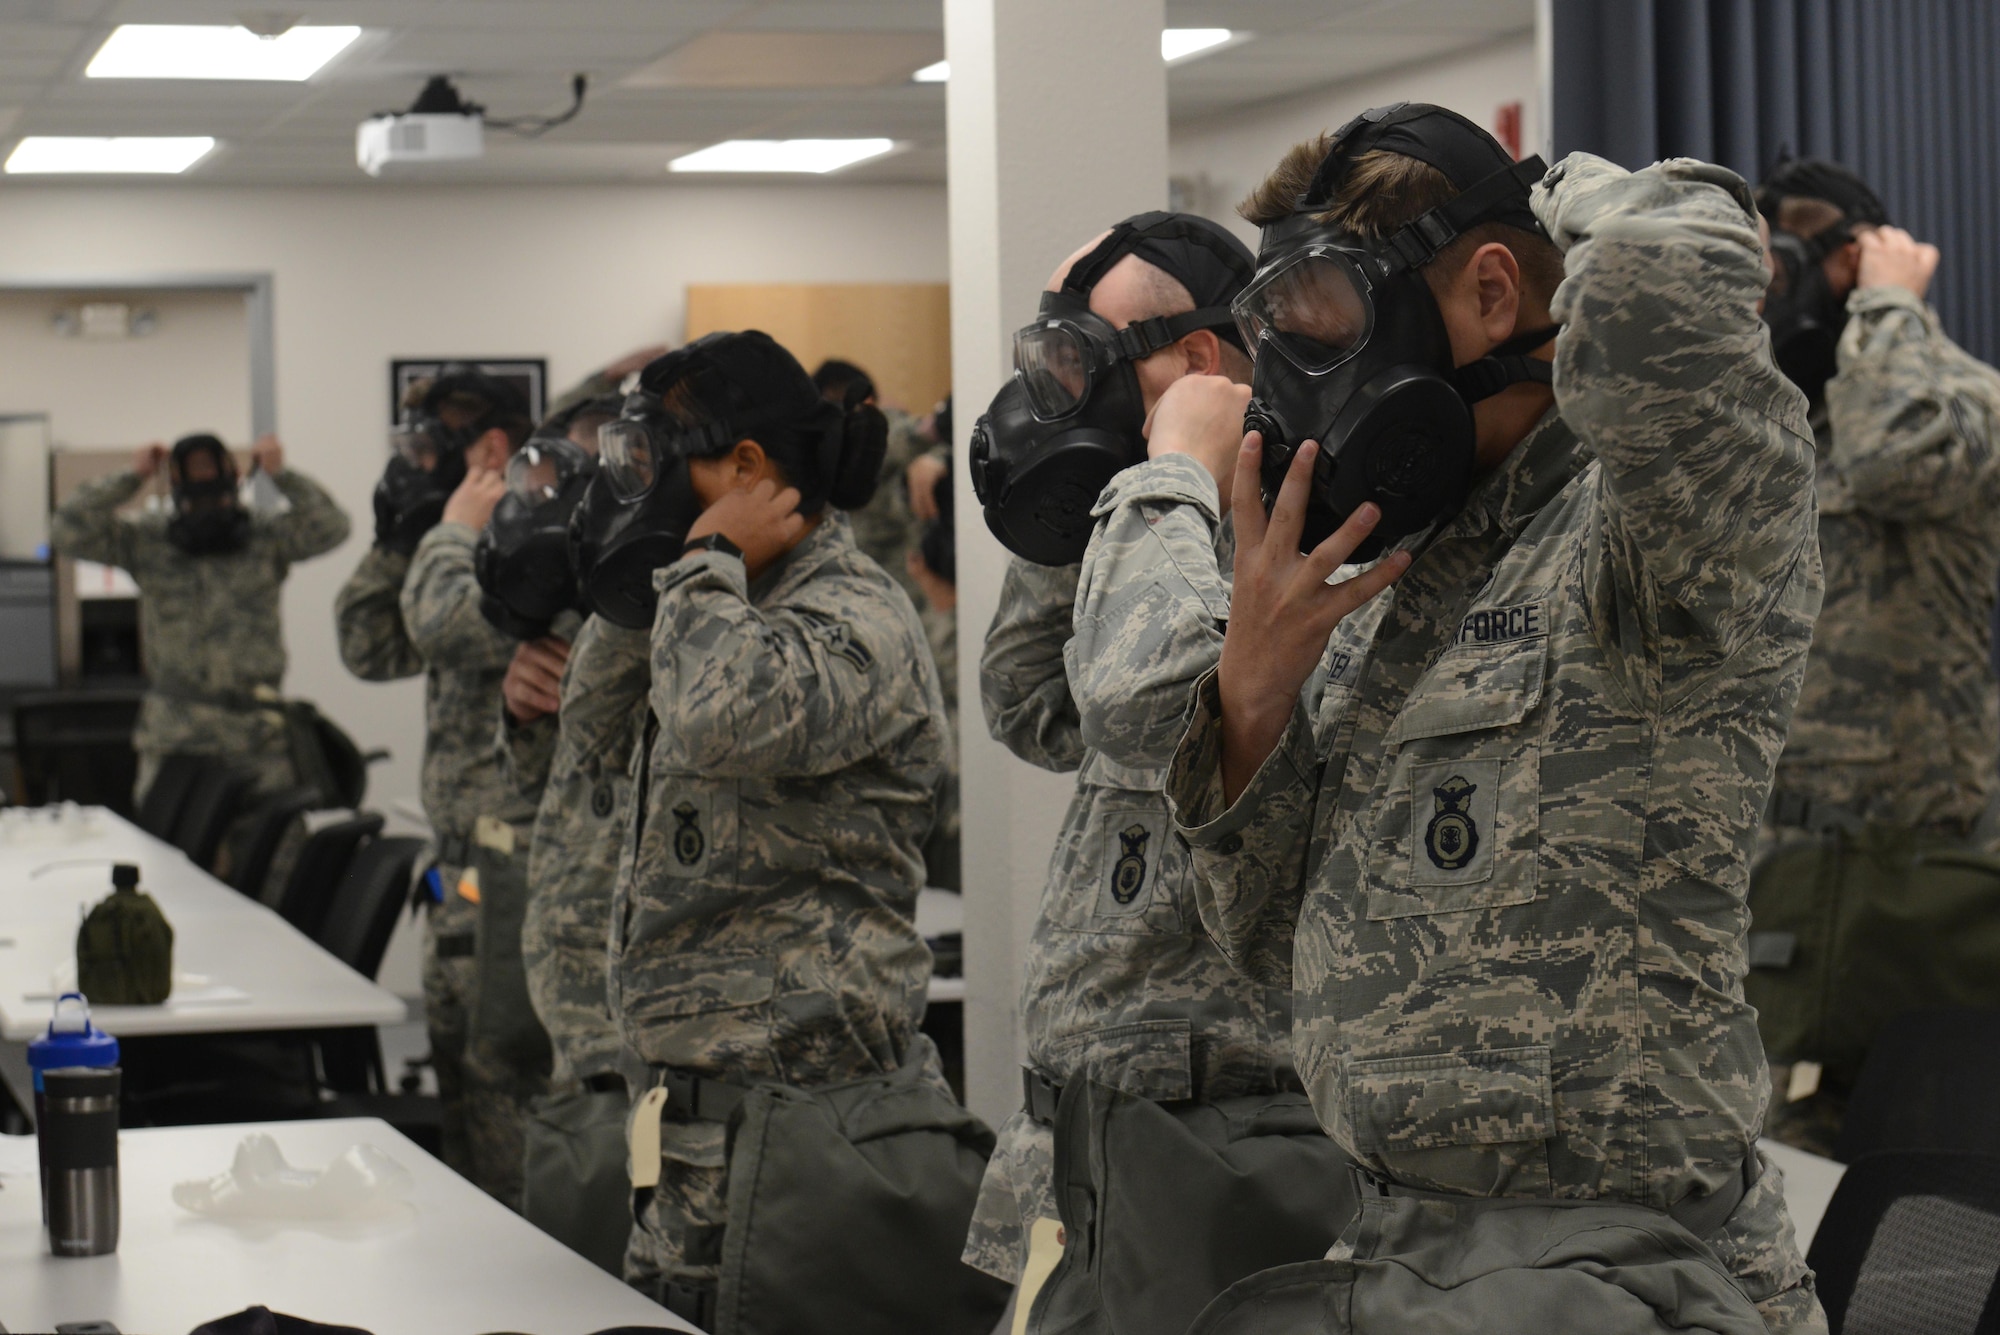 Airmen practice donning their gas mask within nine seconds during a Chemical, Biological, Radiological, and Nuclear defense survival skills training class hosted by the 773d Civil Engineer Squadron emergency management flight at Joint Base Elmendorf-Richardson, Alaska, Aug. 22. The two-hour CBRN class reminds Airmen of the various equipment and proper procedures used pre- and post-attack, and puts the Airmen’s knowledge to the test with an application of this information in full Mission Oriented Protected Posture gear.